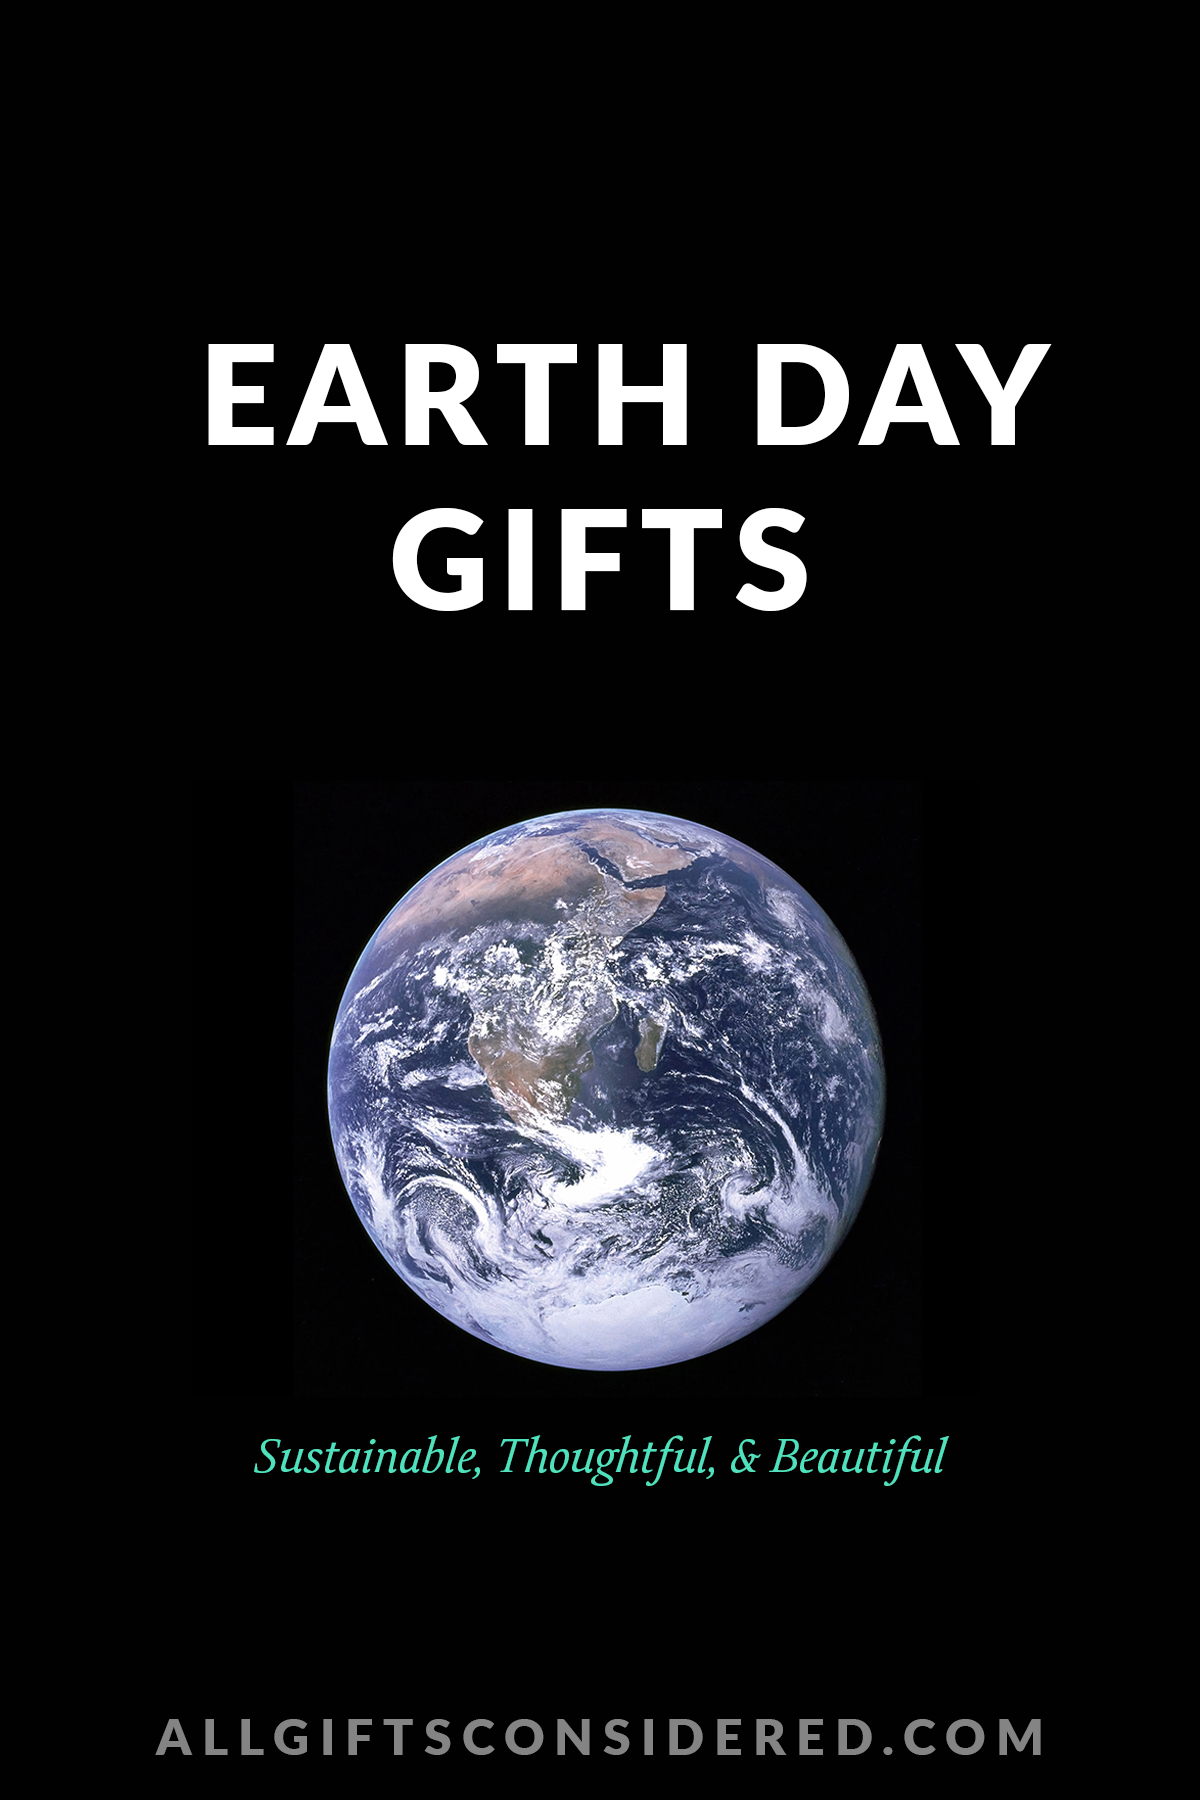 earth day gifts - feature image